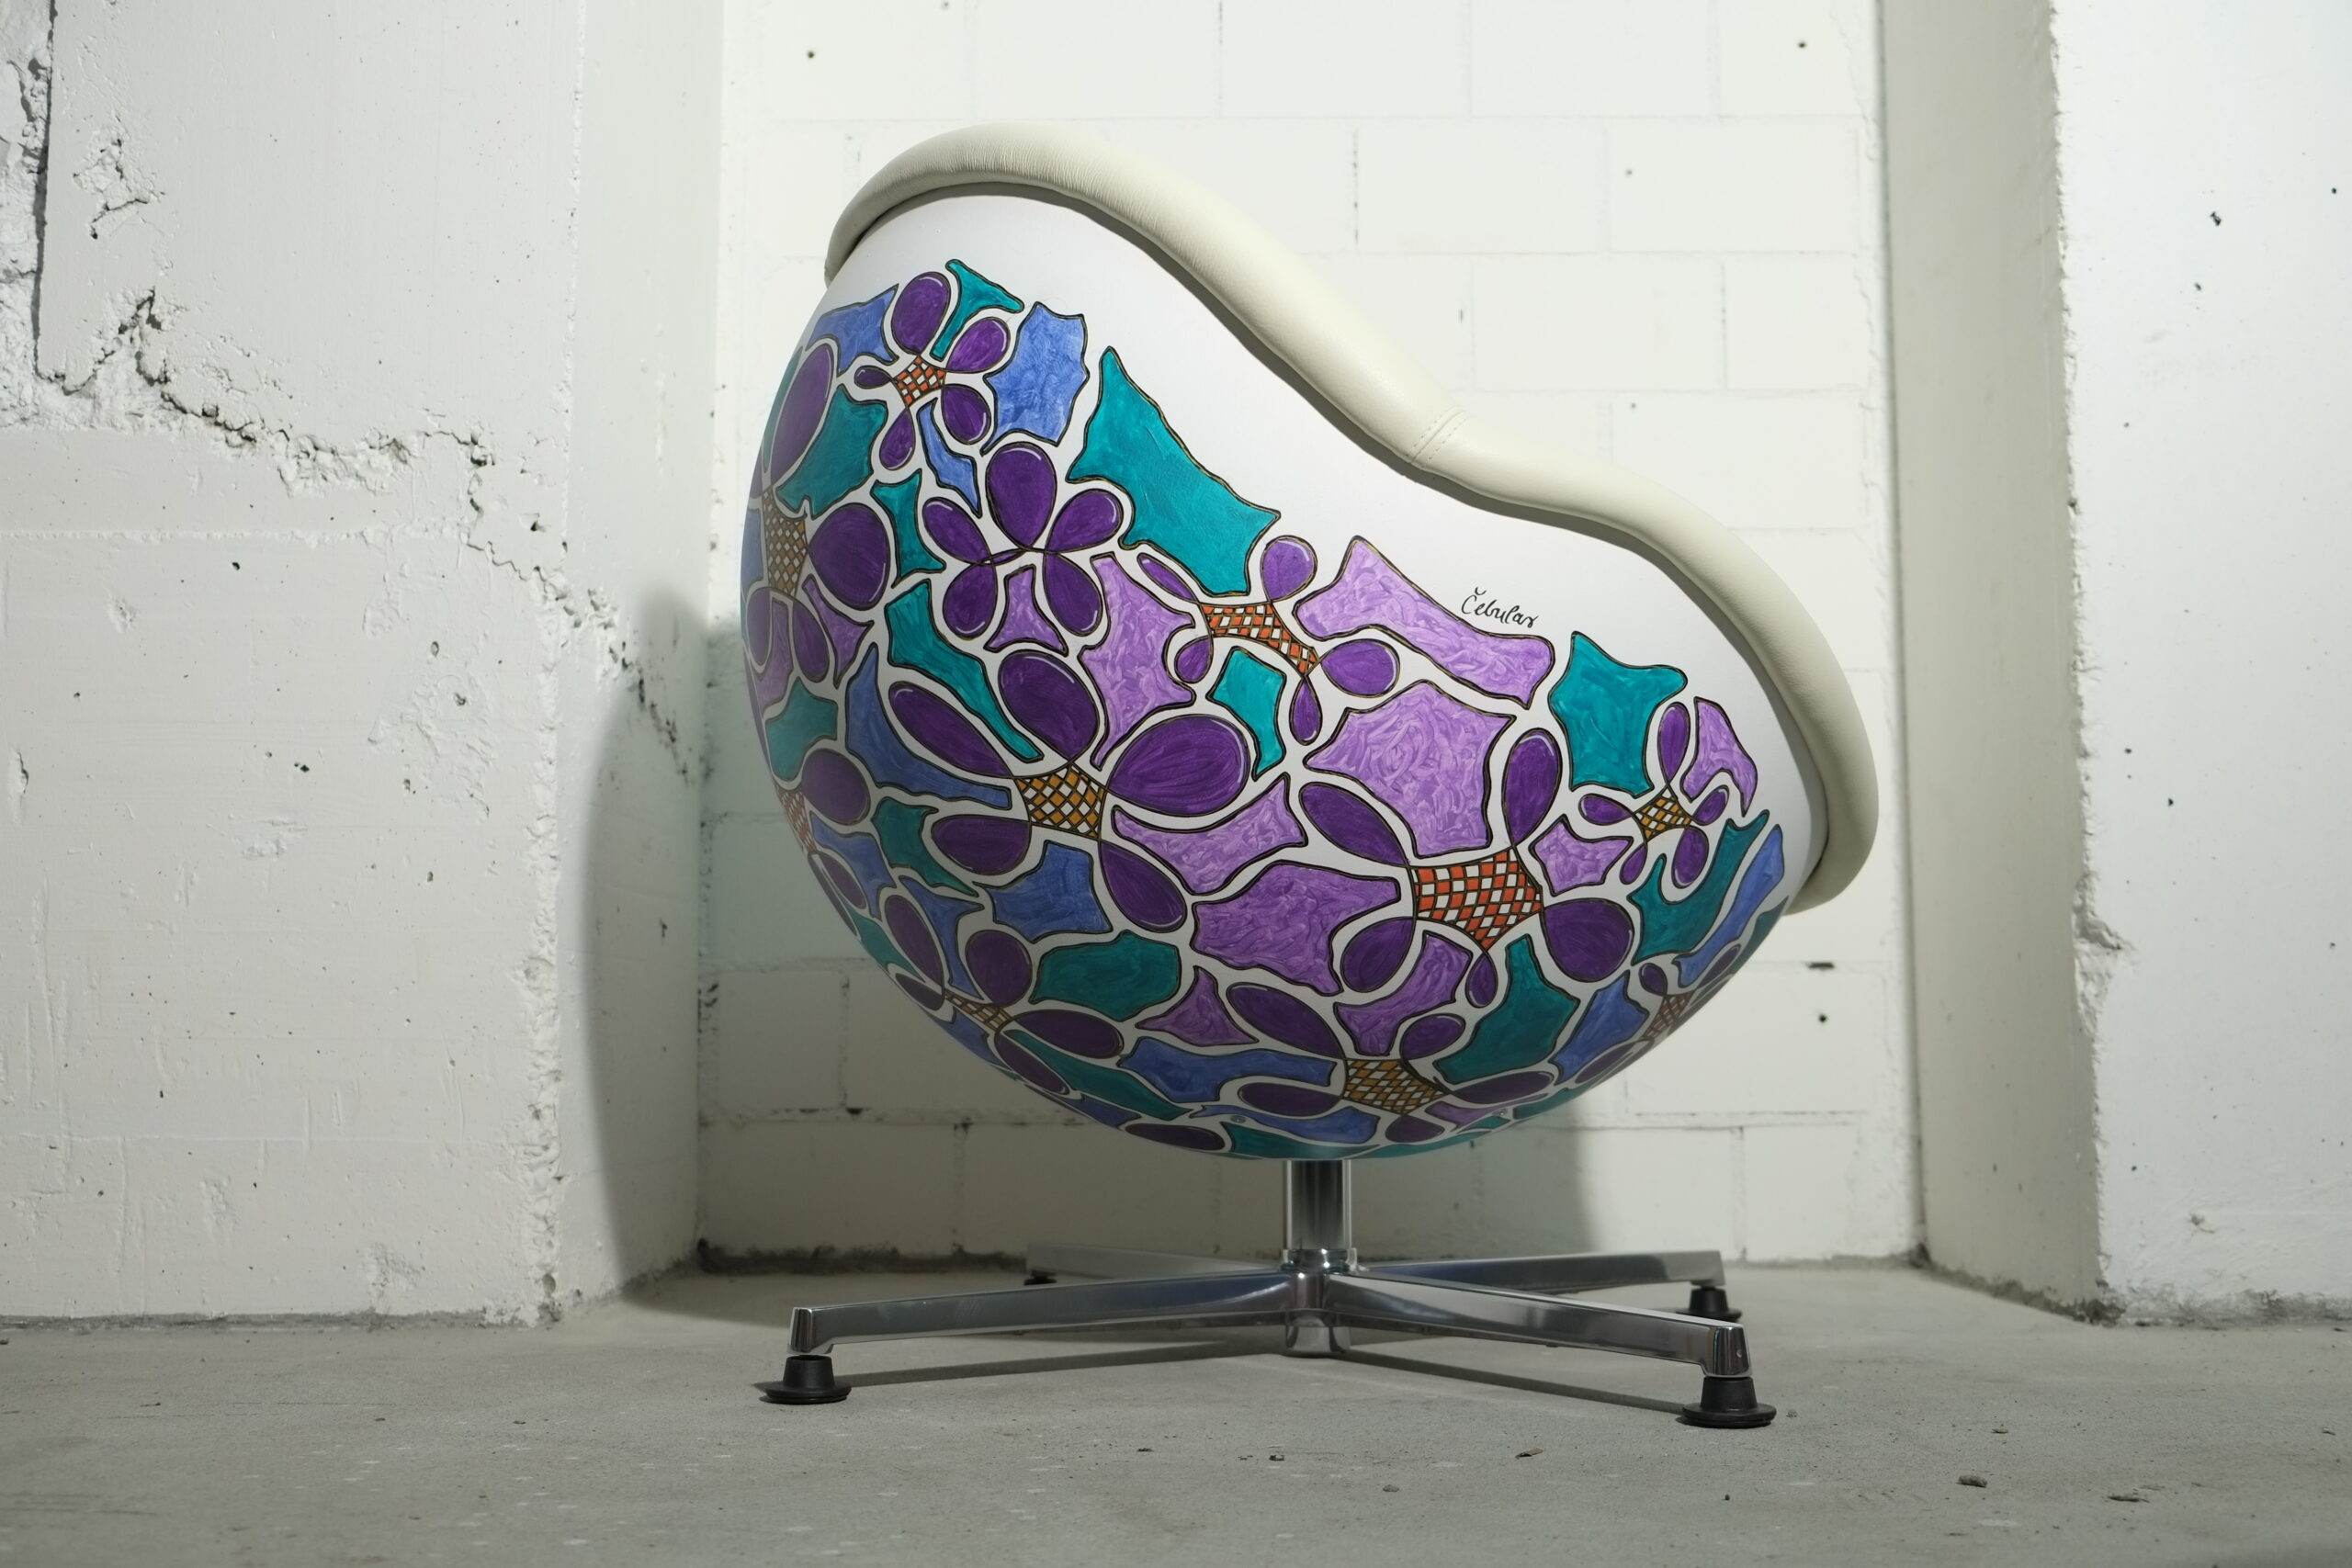 Playground Art Chair - 2014,Original artwork on shell,Markers and acrylic colors,synthetic shell, leather seat cover,height 90 cm, diameter 87 cm, seat height 40 cm